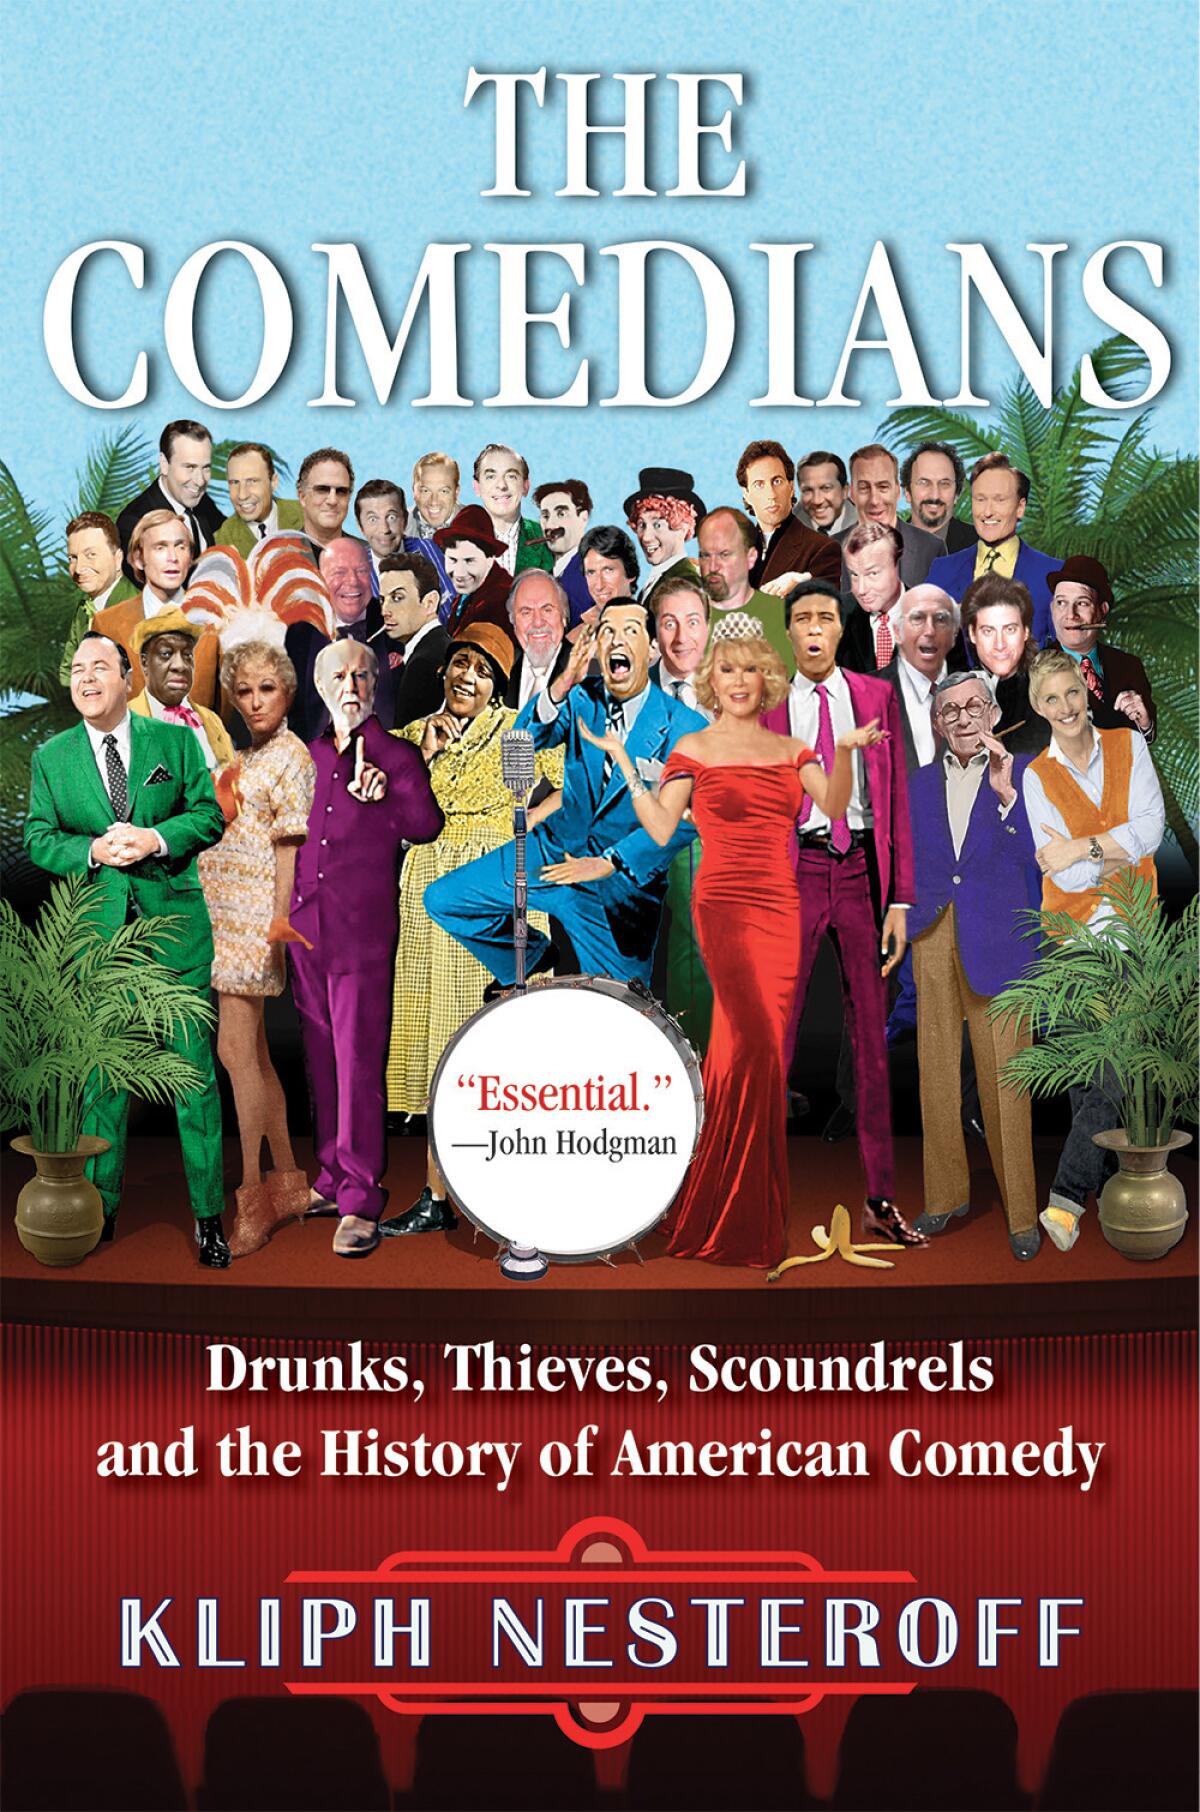 "The Comedians: Drunks, Thieves, Scoundrels and the History of American Comedy" by Kliph Nesteroff